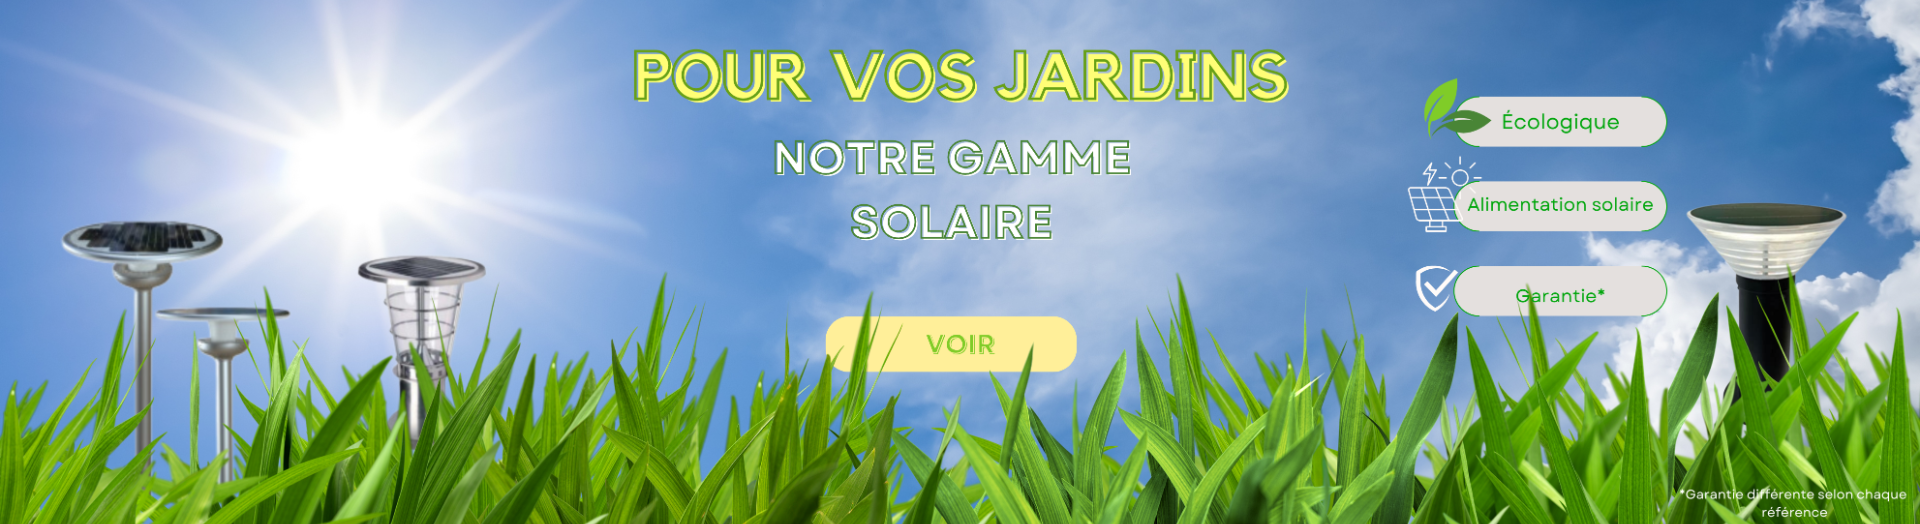 gamme solaire